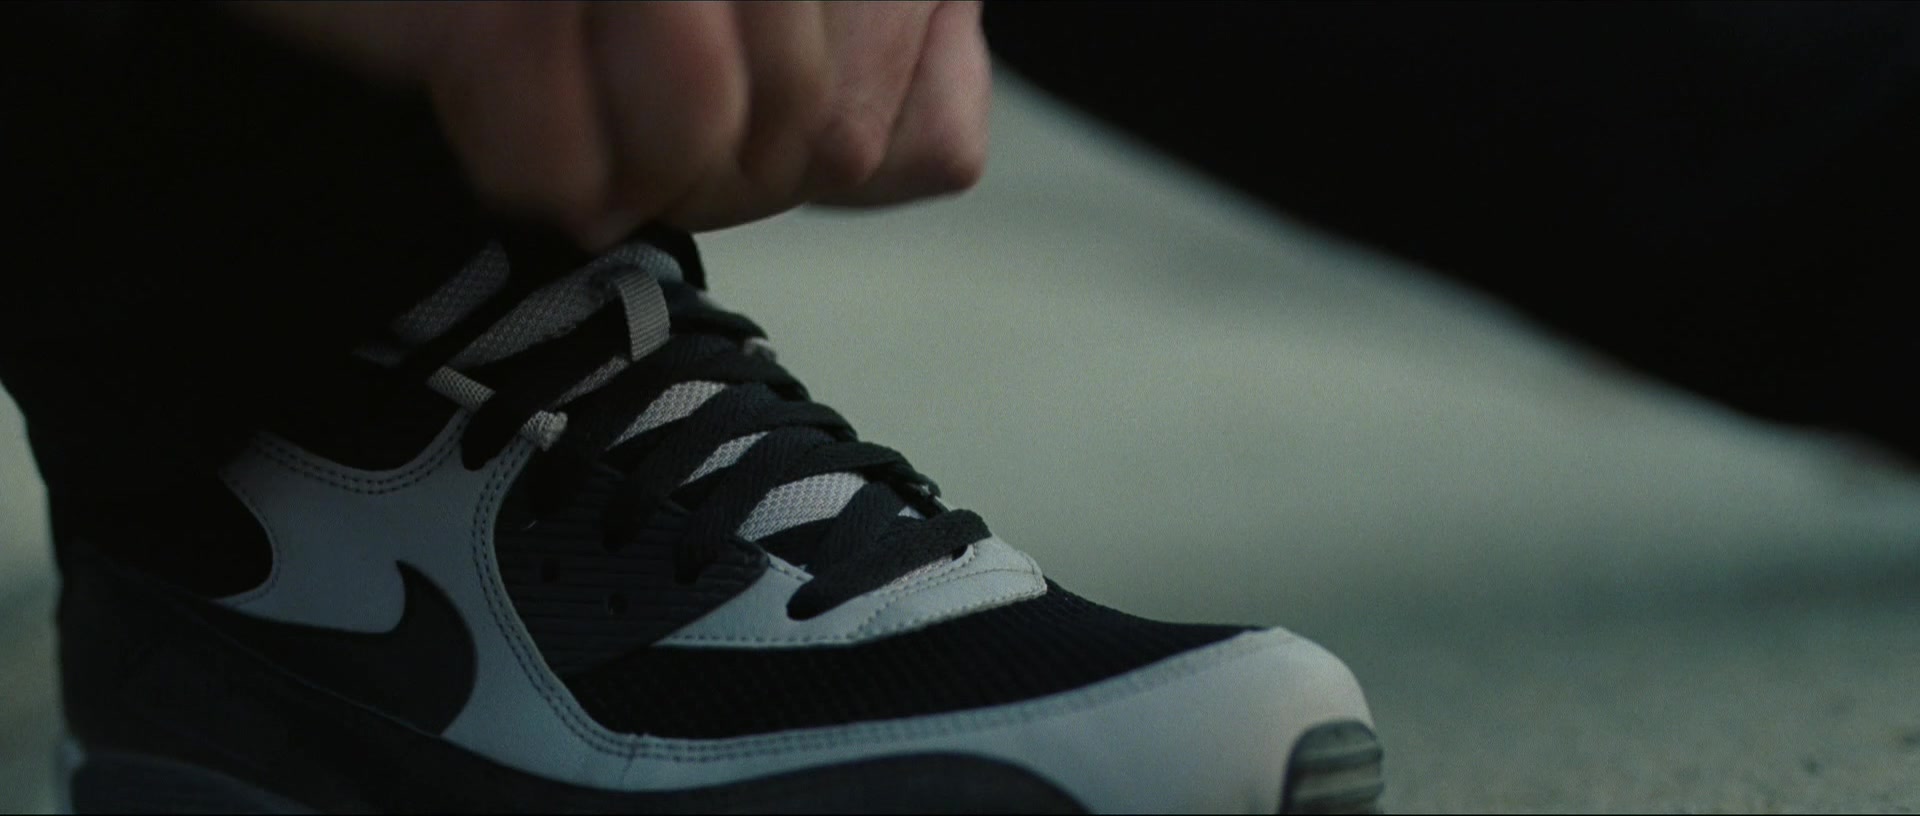 Apartment Incentive spiritual Nike Sneakers Worn By Jesse Plemons In Vice (2018)